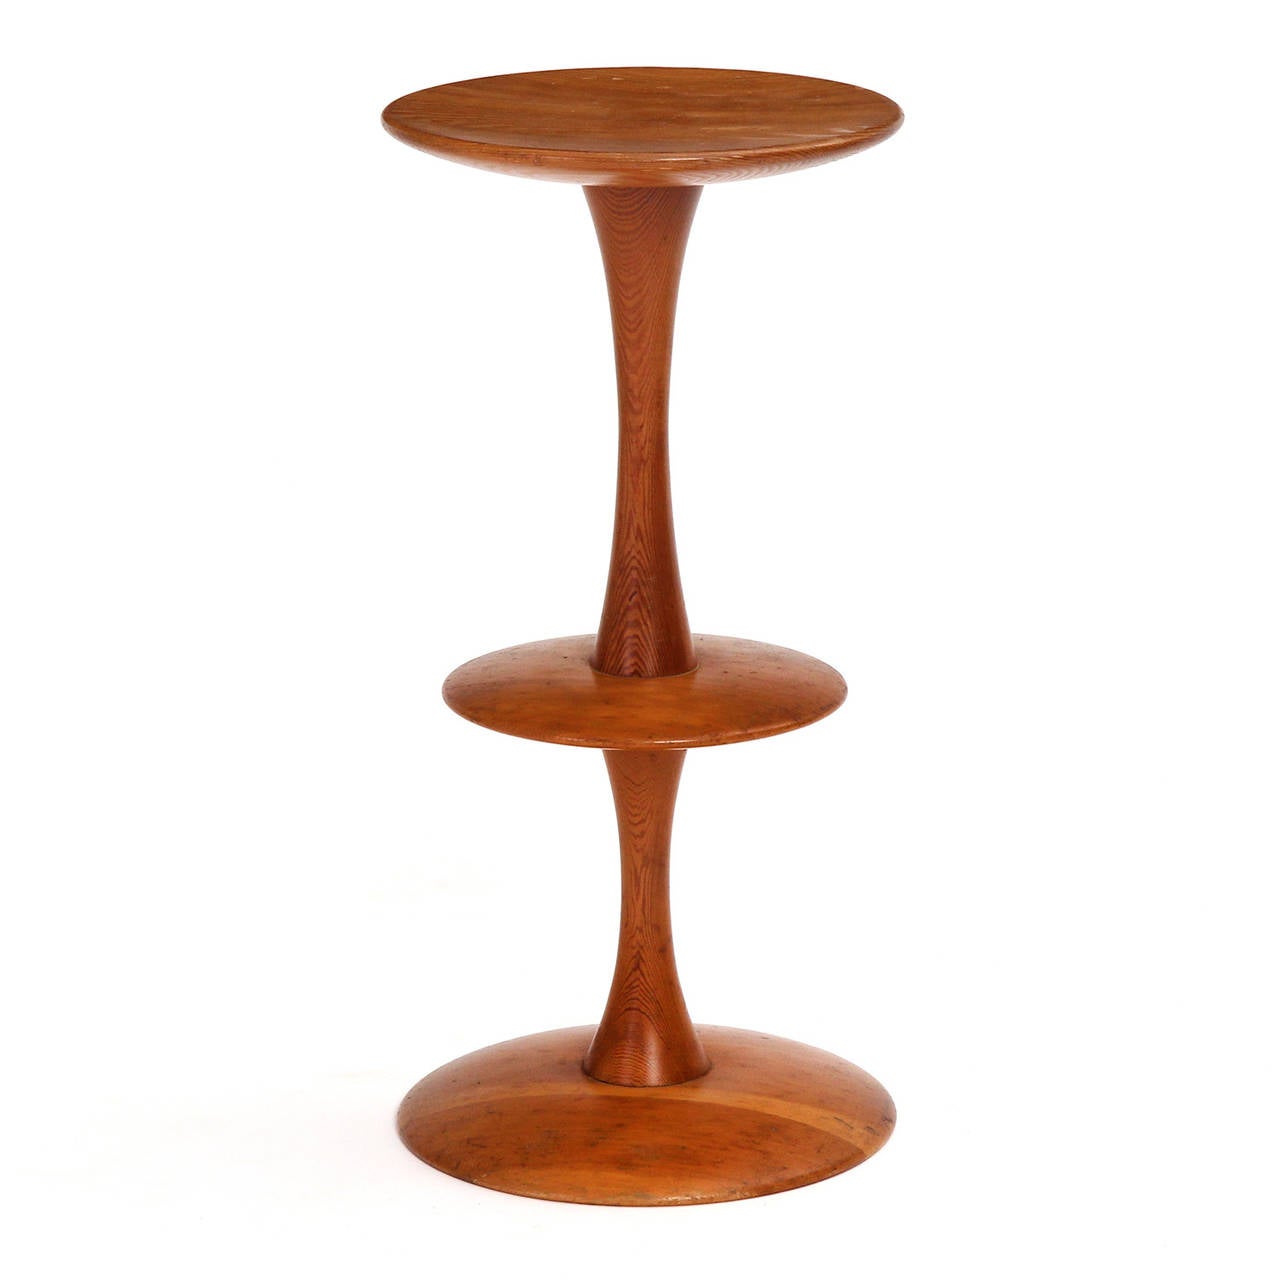 A sculptural, uncommon and beautiful lathe-turned pedestal having an expressive undulating form and crafted of solid teak.